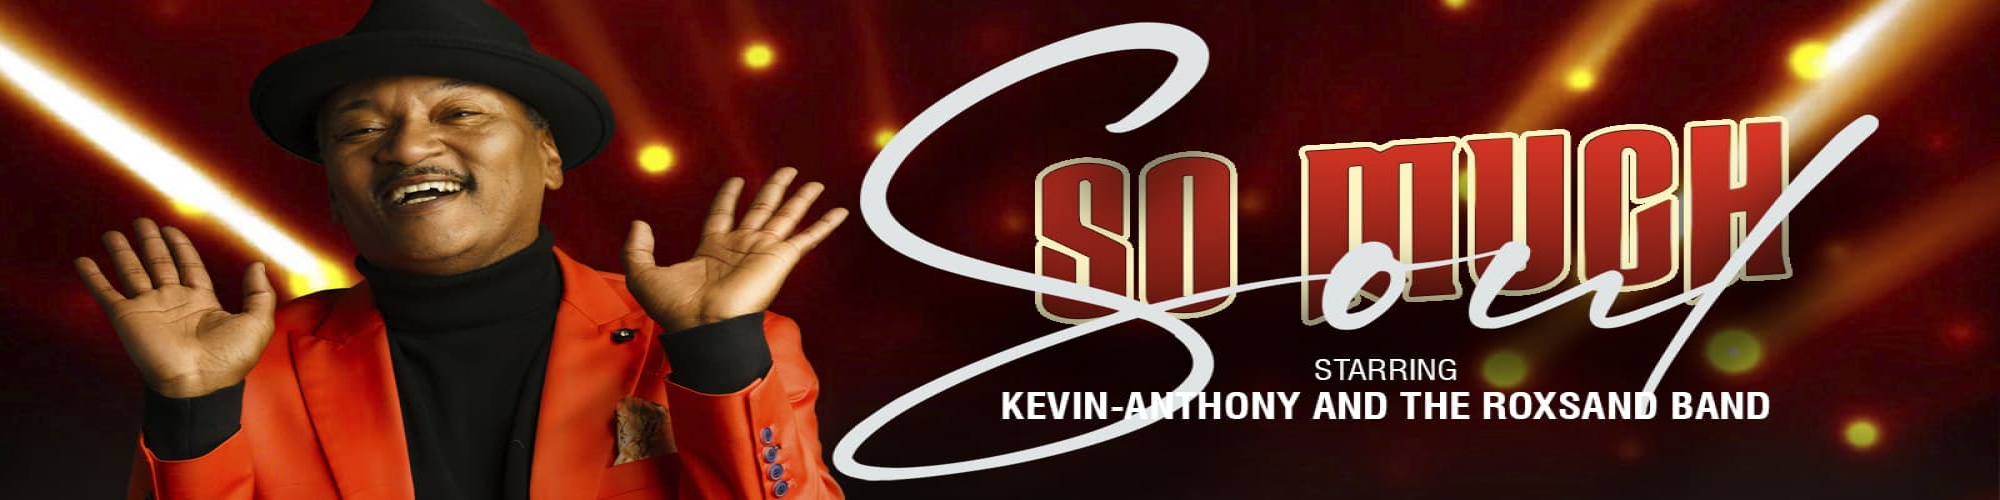 SO MUCH SOUL, starring Kevin-Anthony (Starlight Cabaret)